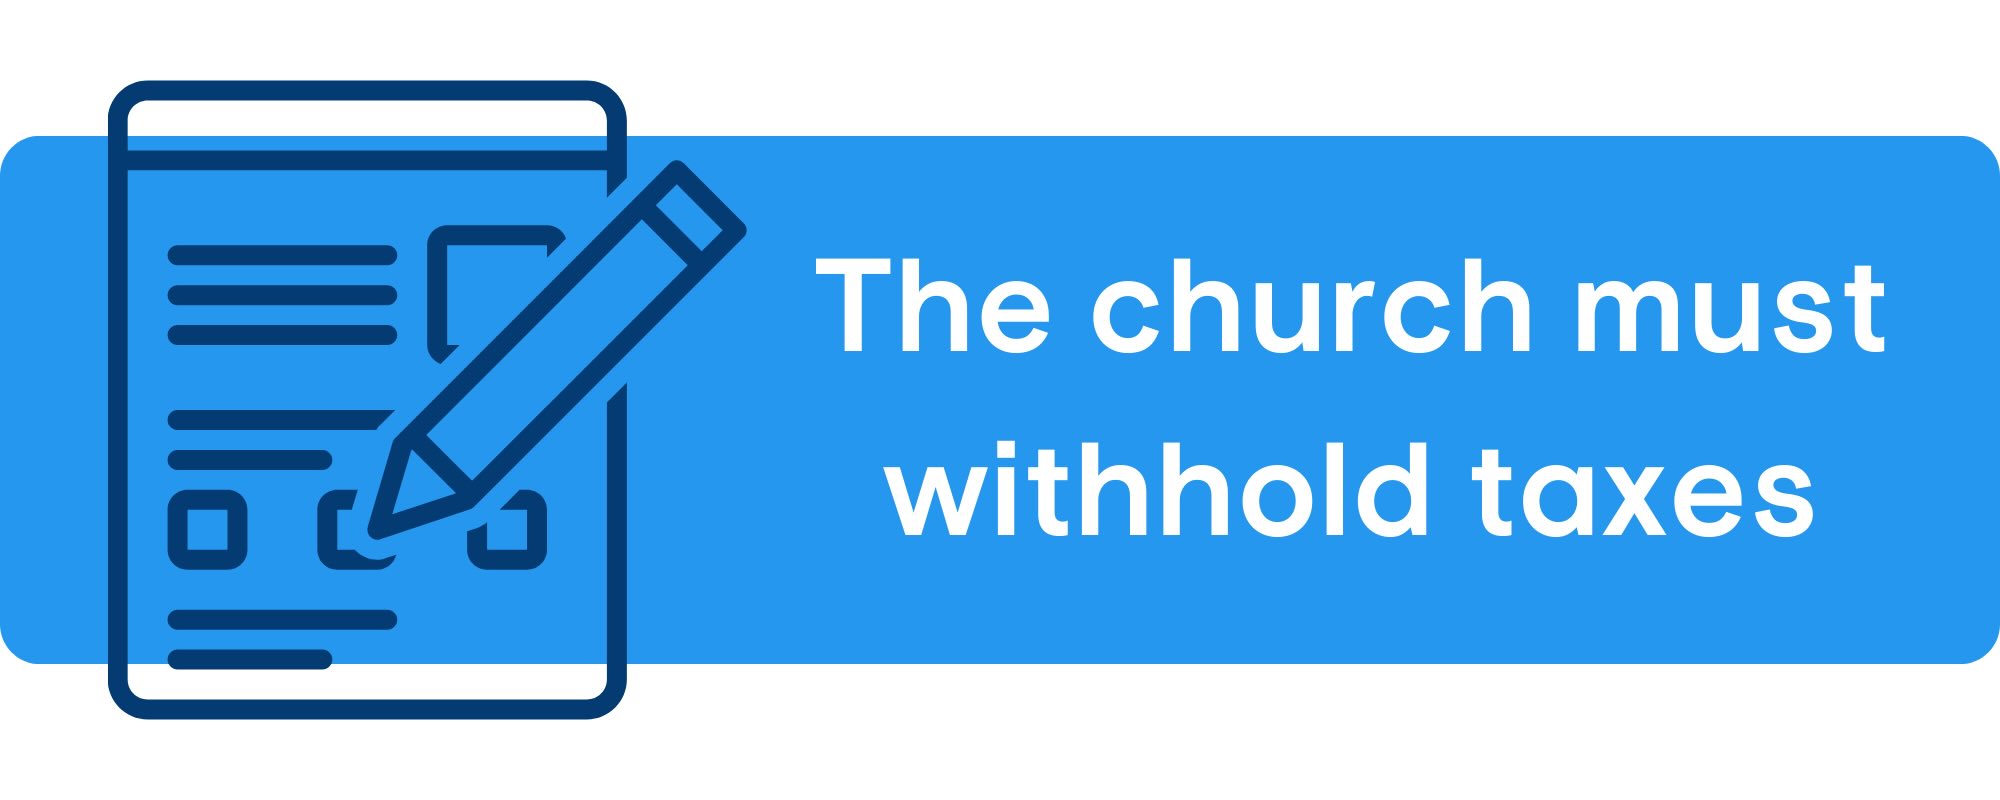 Church must withhold income taxes like other employers